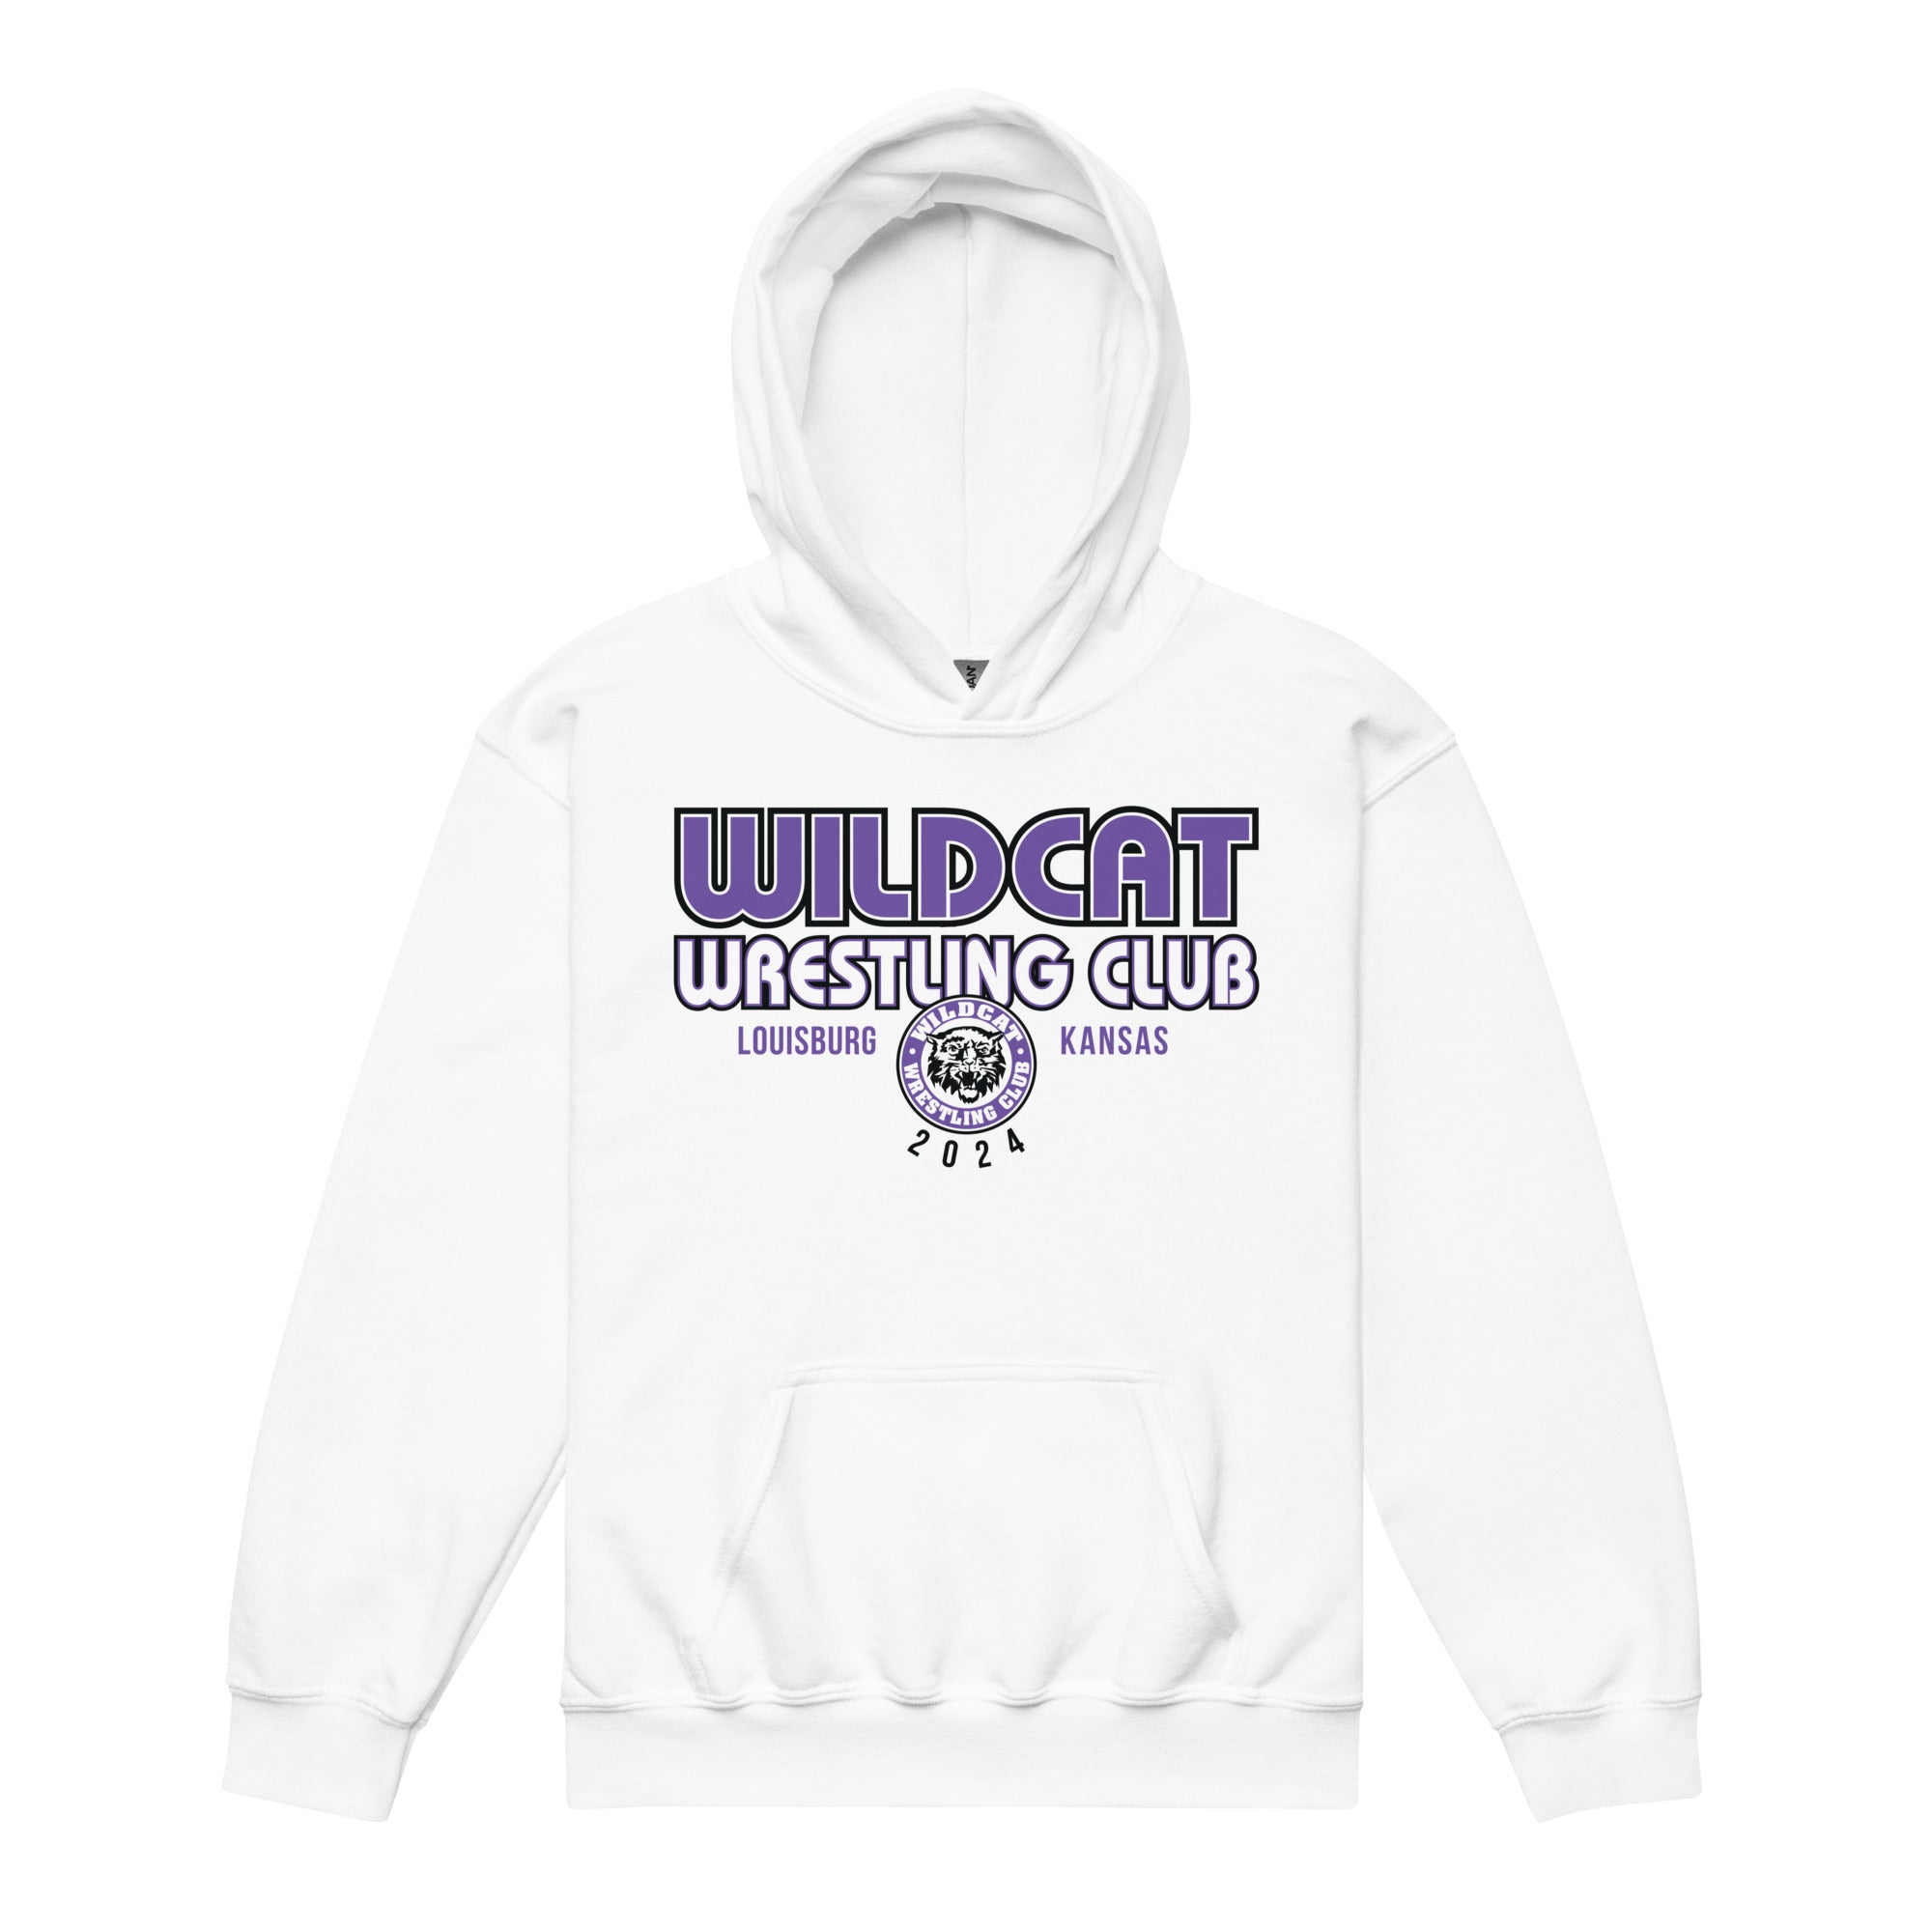 Wildcat Wrestling Club (Louisburg) - Front Design Only - Youth heavy blend hoodie